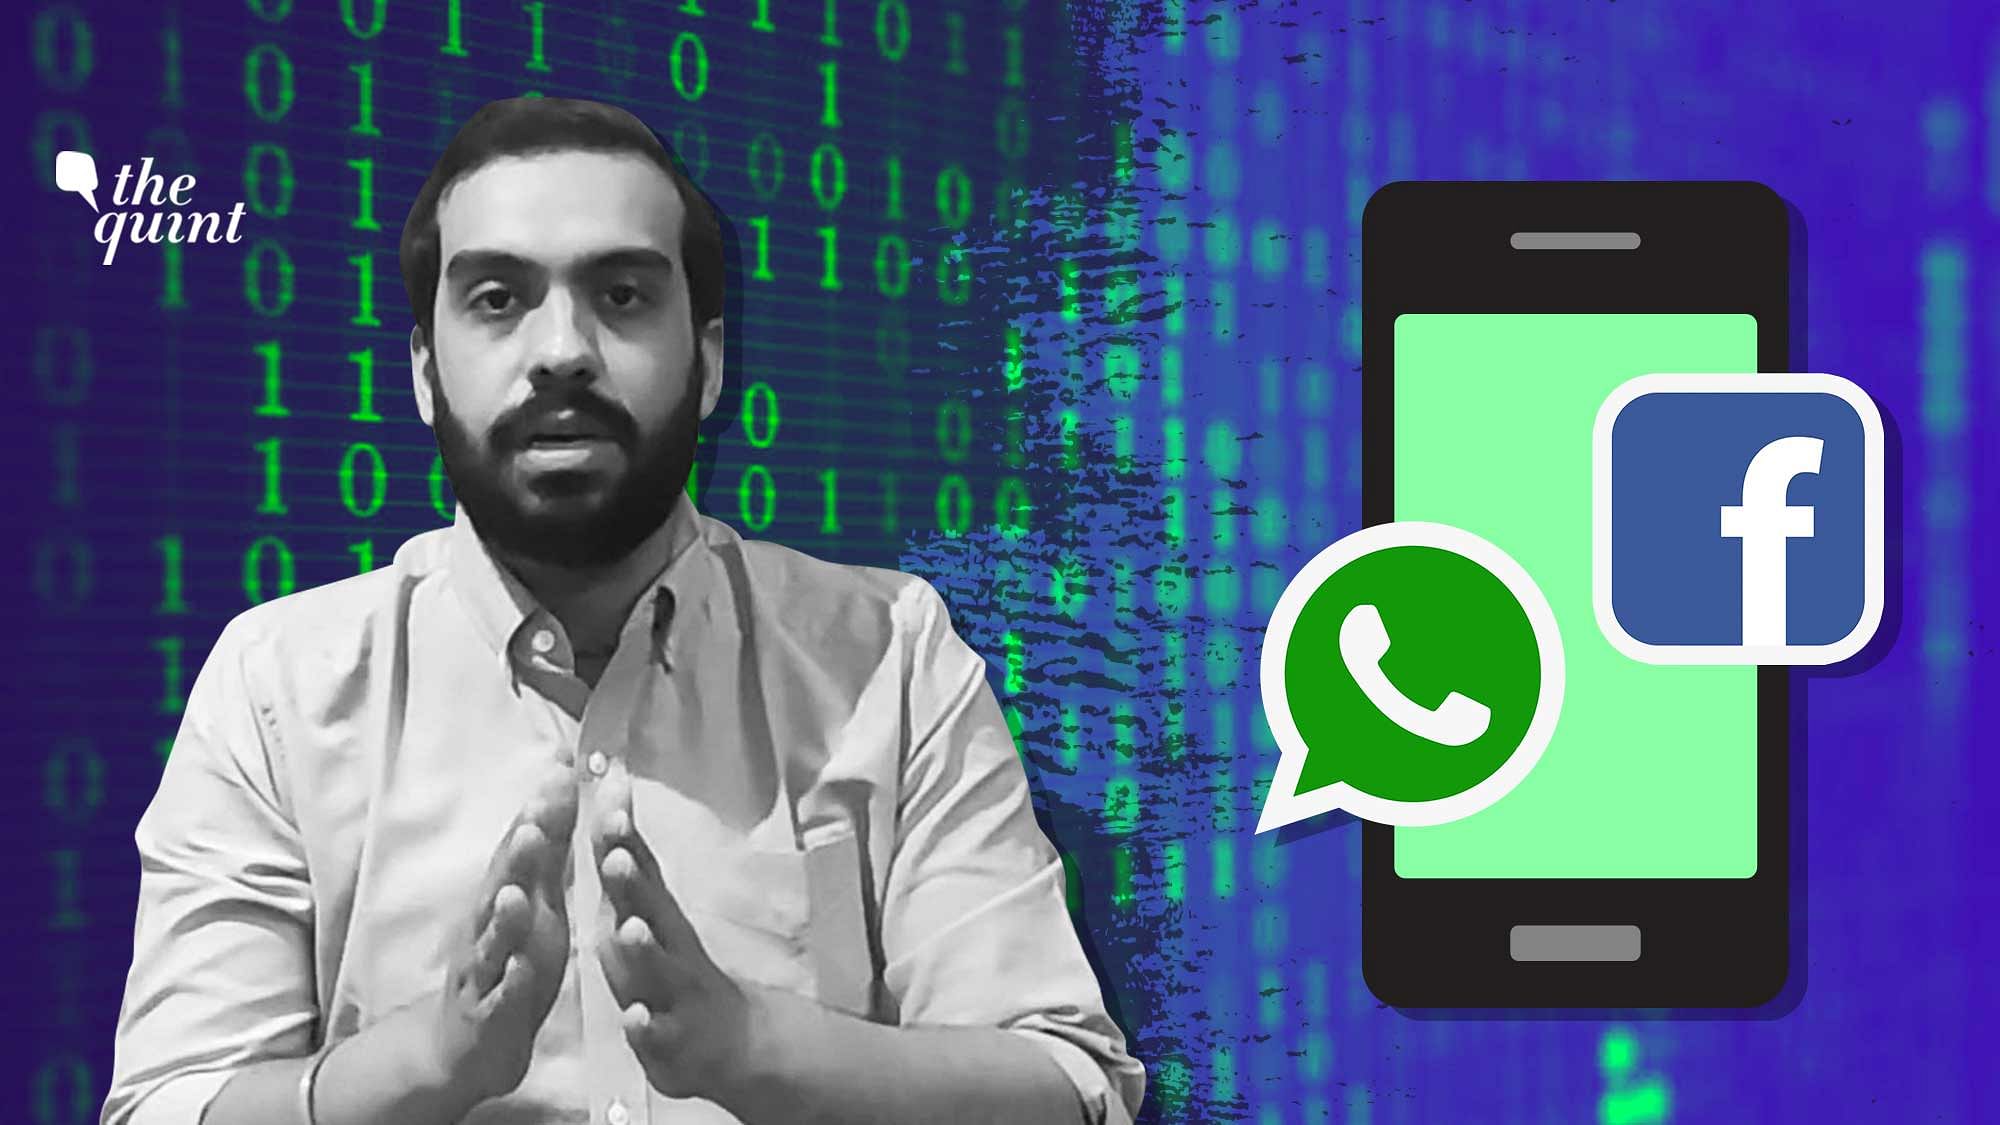 WhatsApp’s 2016 privacy update had given users 30 days to opt out of data sharing with Facebook.&nbsp;